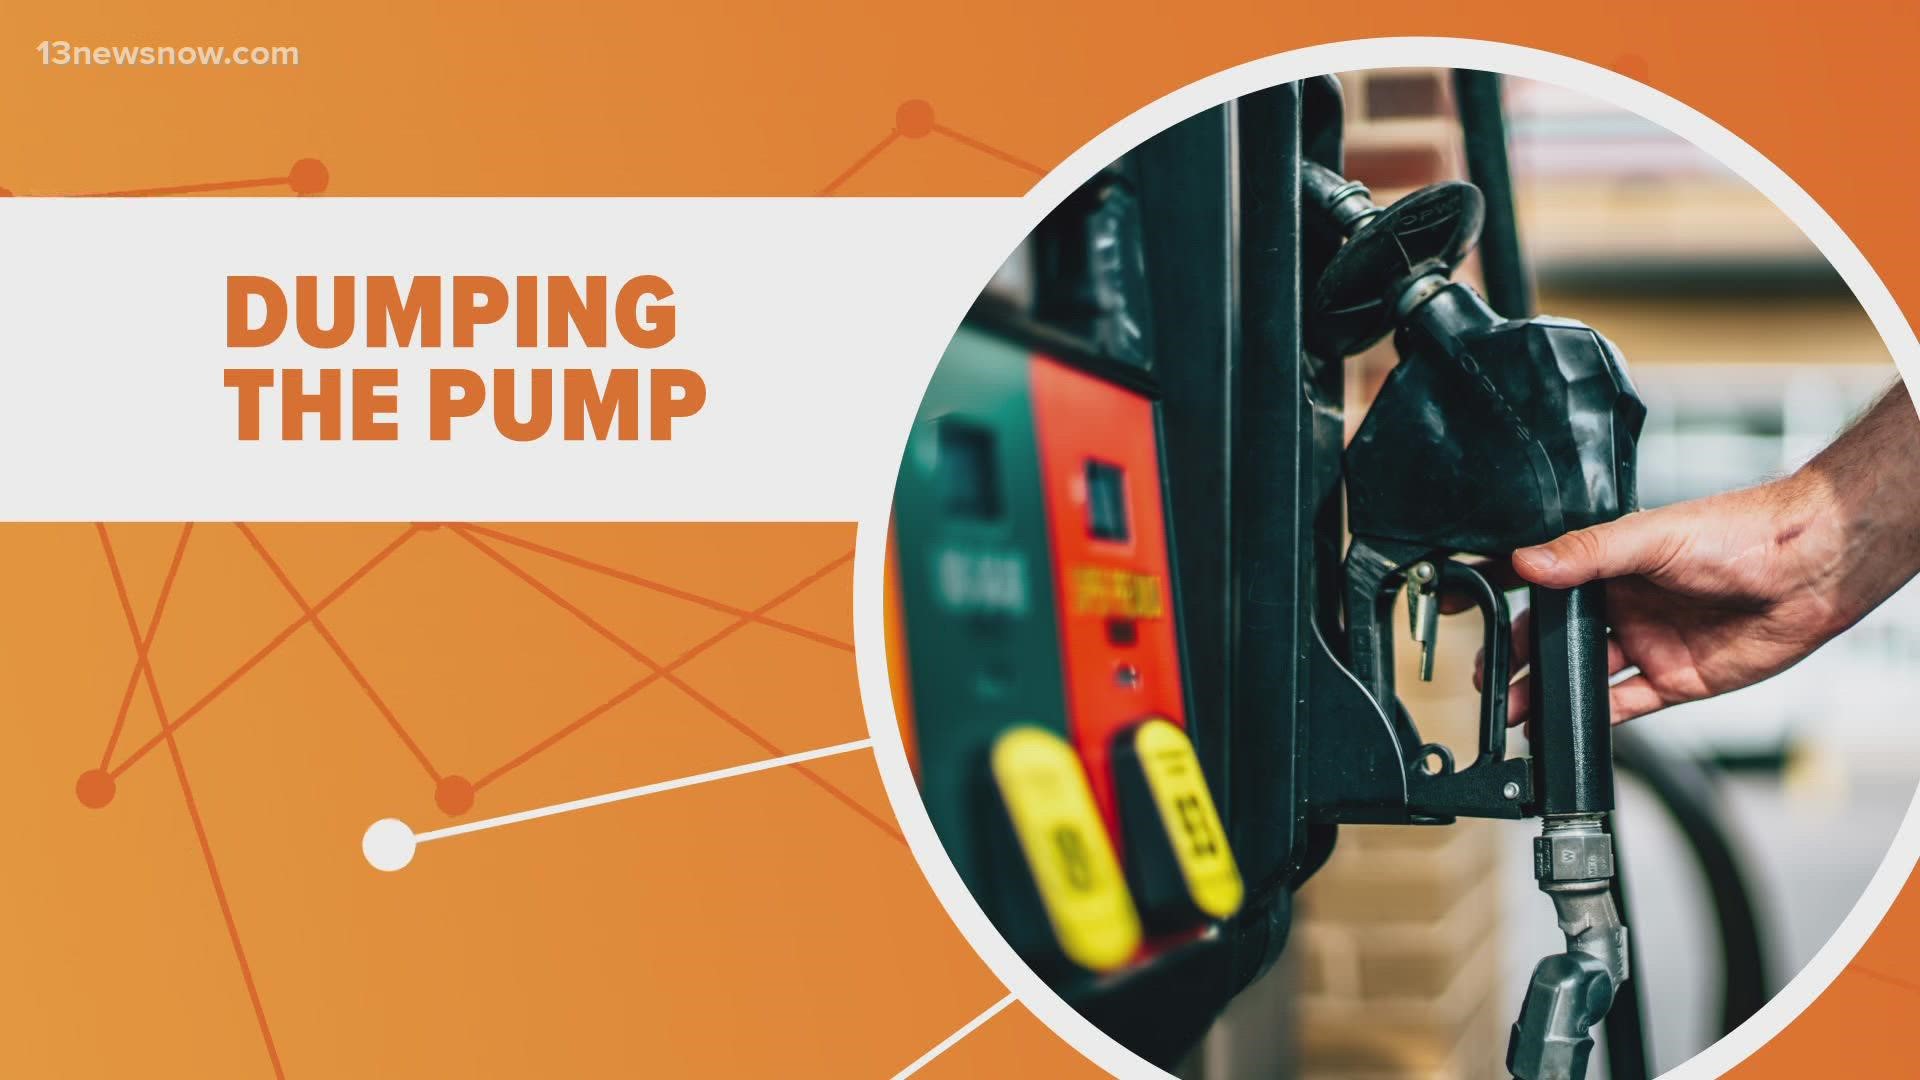 If you think electric charging stations will soon replace pumps at gas stations, think again.